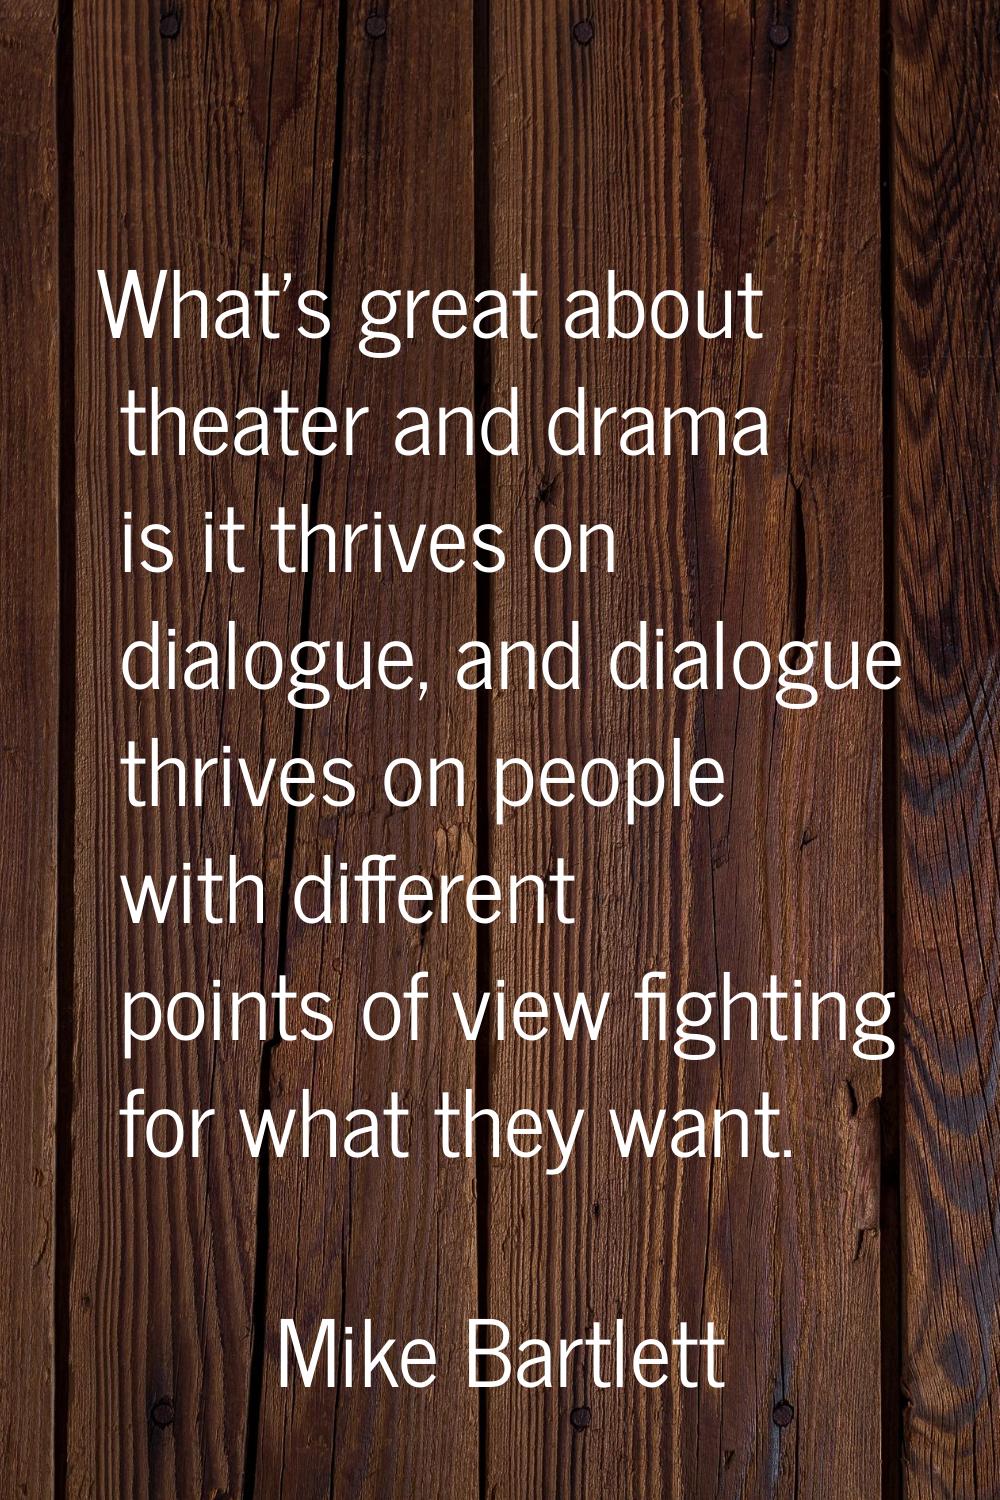 What's great about theater and drama is it thrives on dialogue, and dialogue thrives on people with